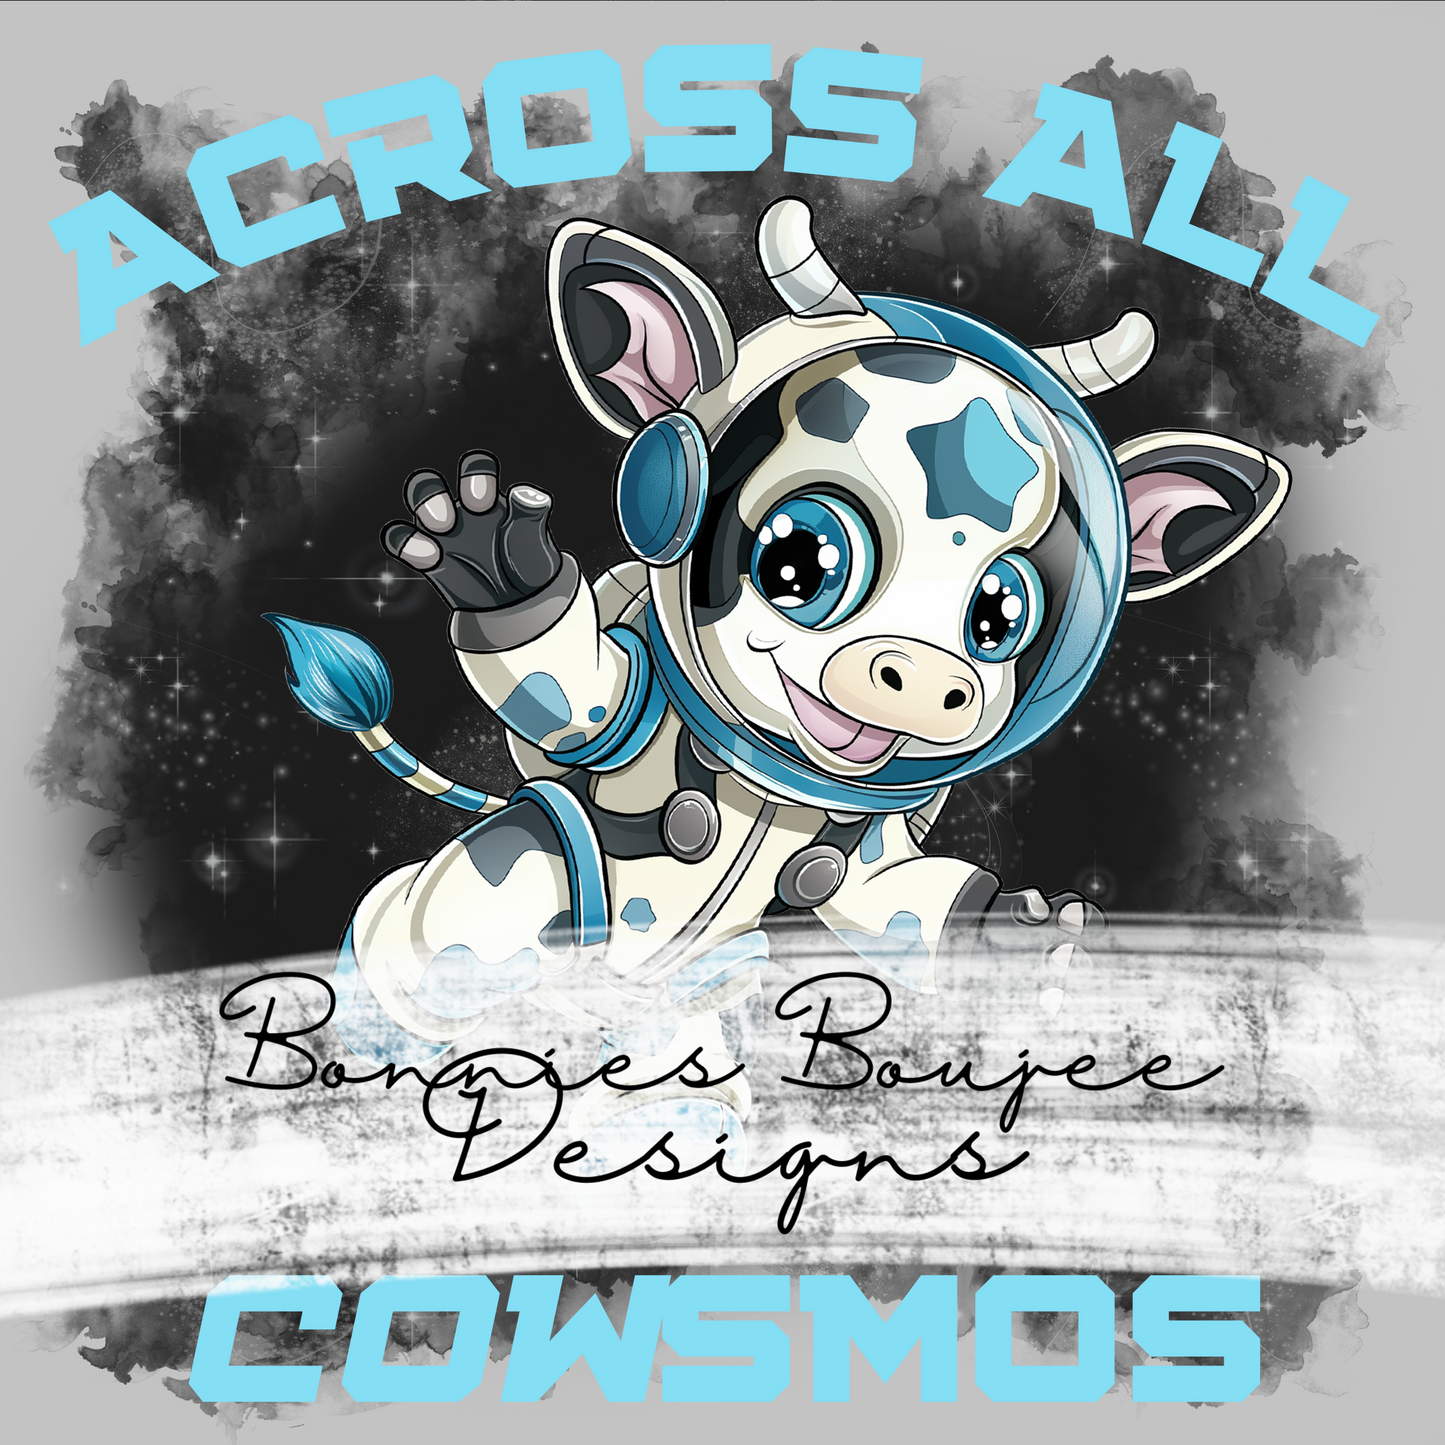 Space Cow ALL COLORS Bundle Purchase